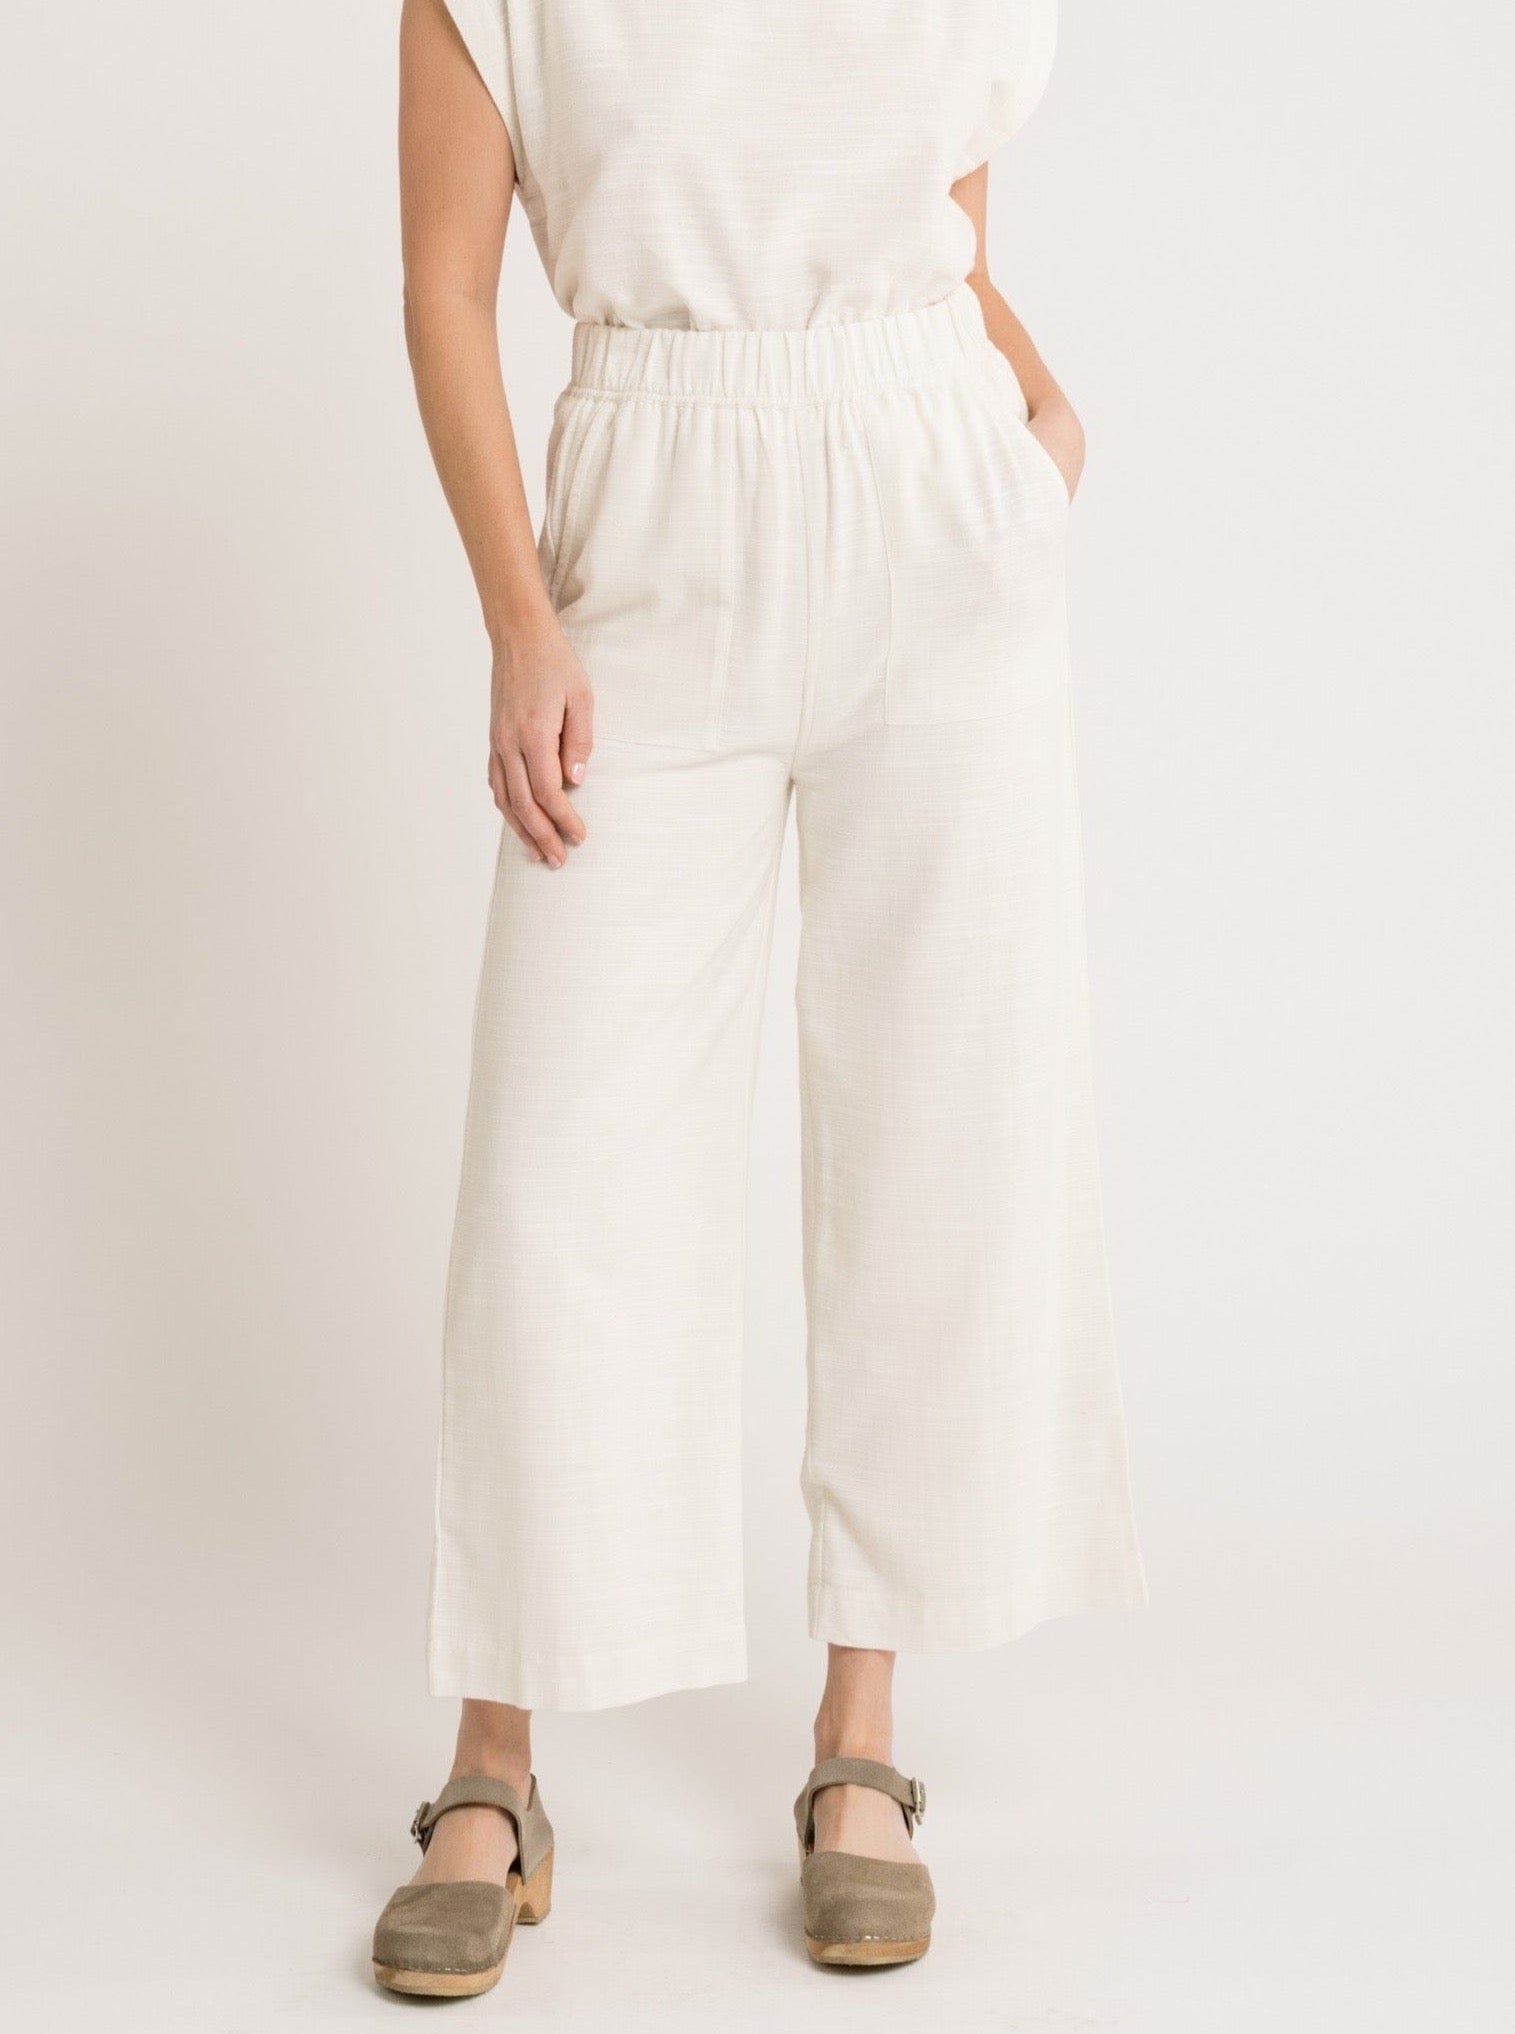 A woman wearing the Everyday Crop Pant - Ivory jumpsuit and sandals.